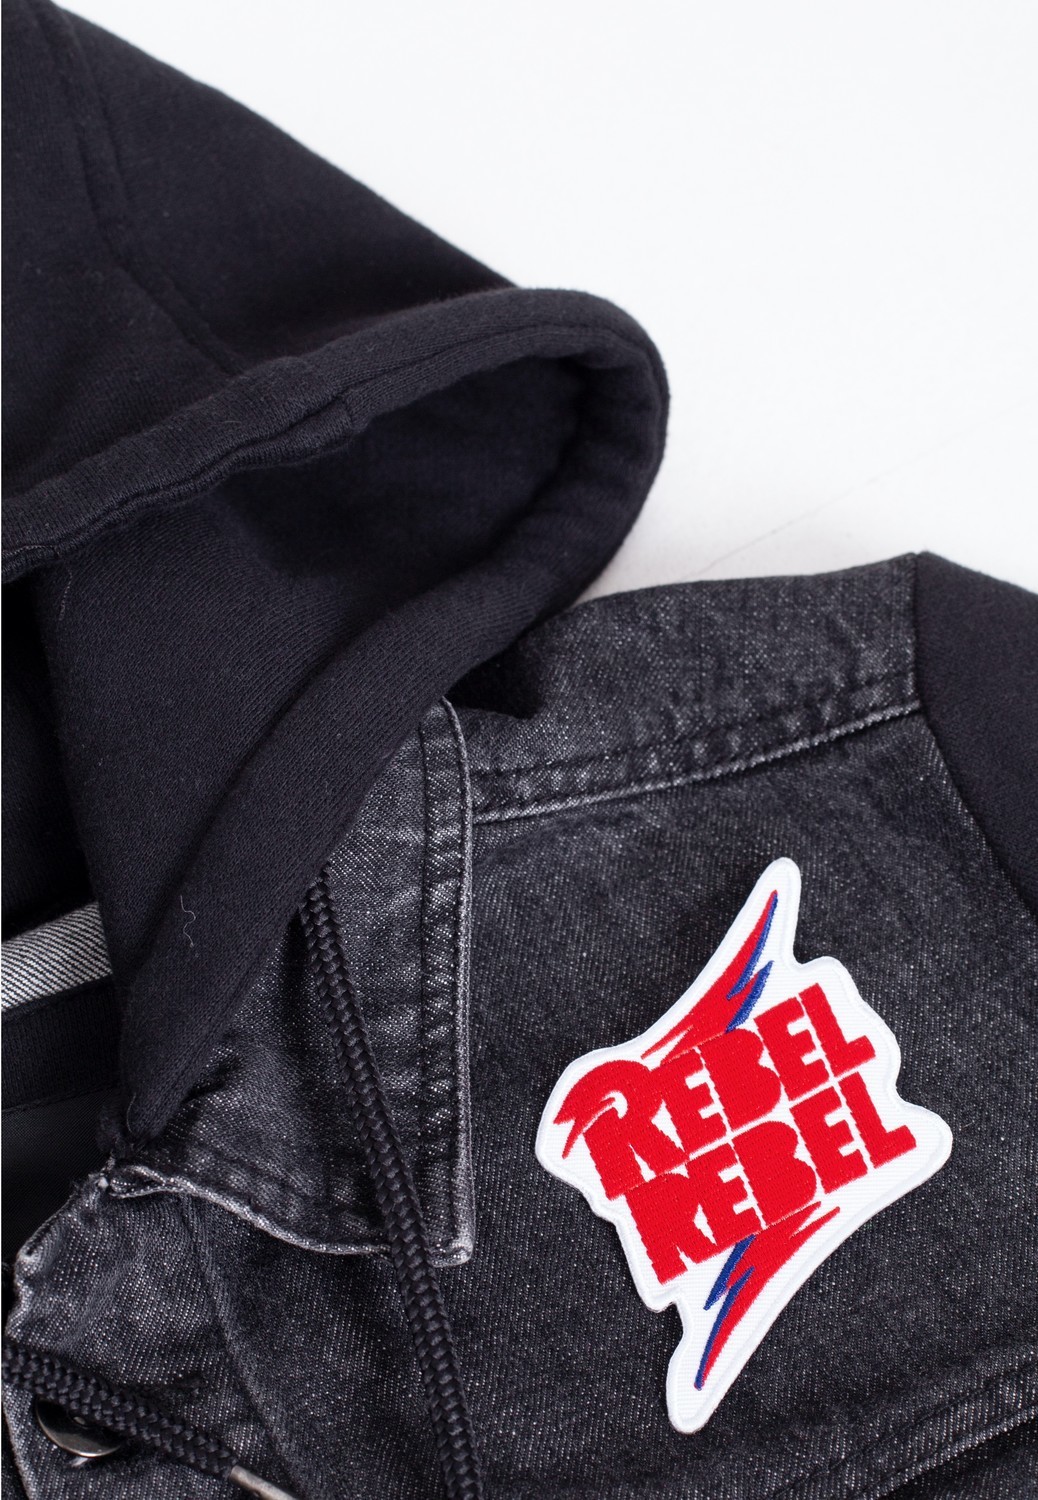 David Bowie - Rebel Rebel - Patches